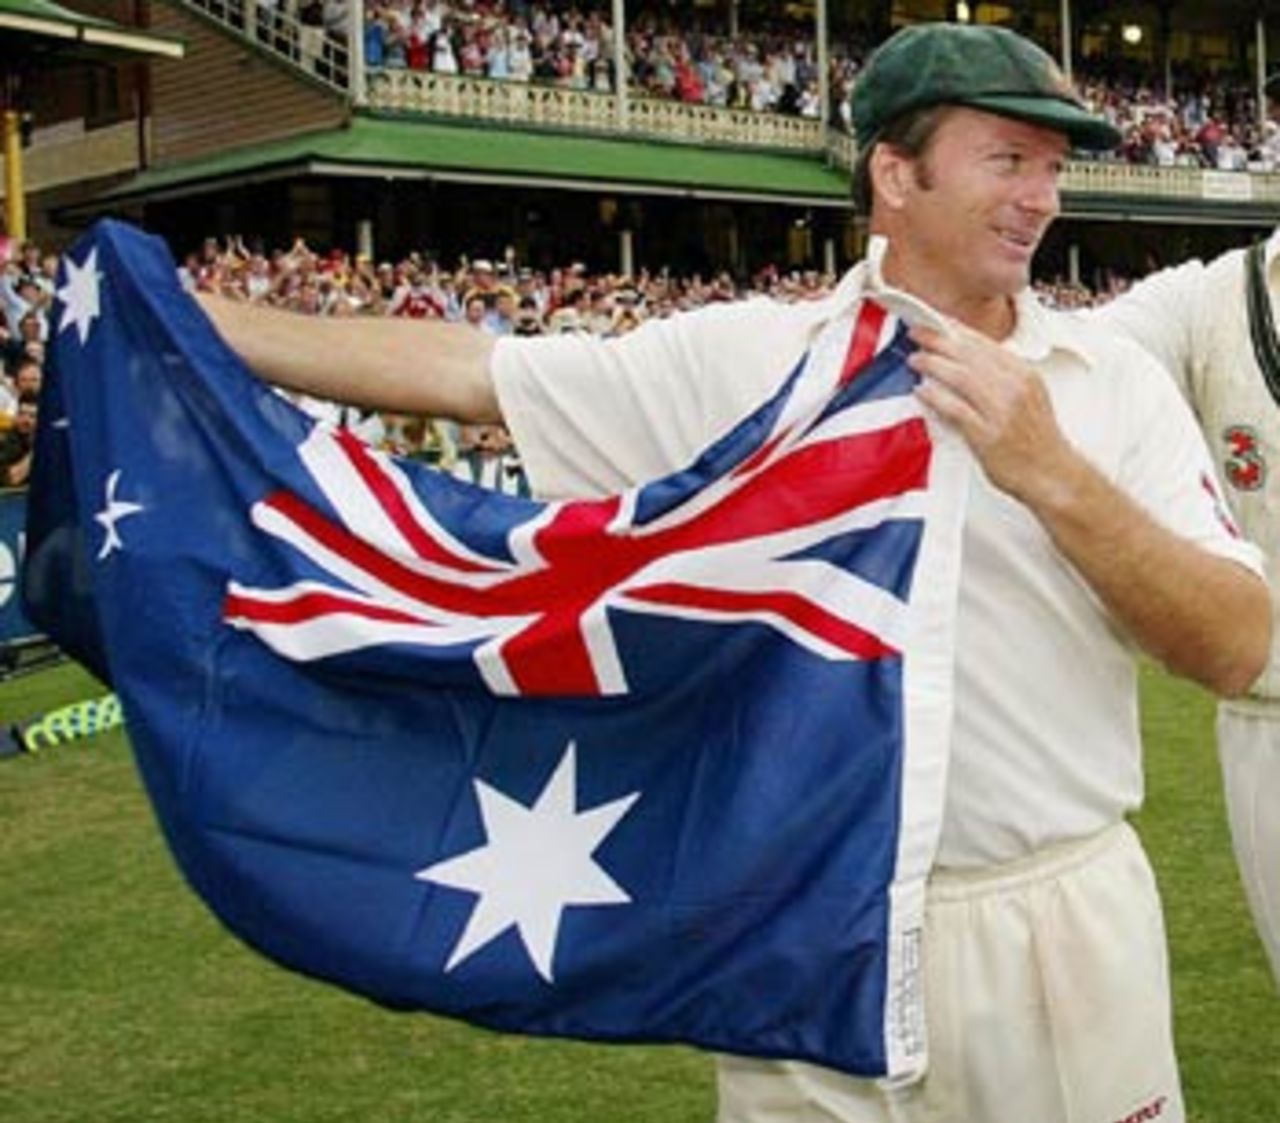 The Australian flag was proudly waved, Australia v India, 4th Test, Sydney, 5th day, January 6, 2004